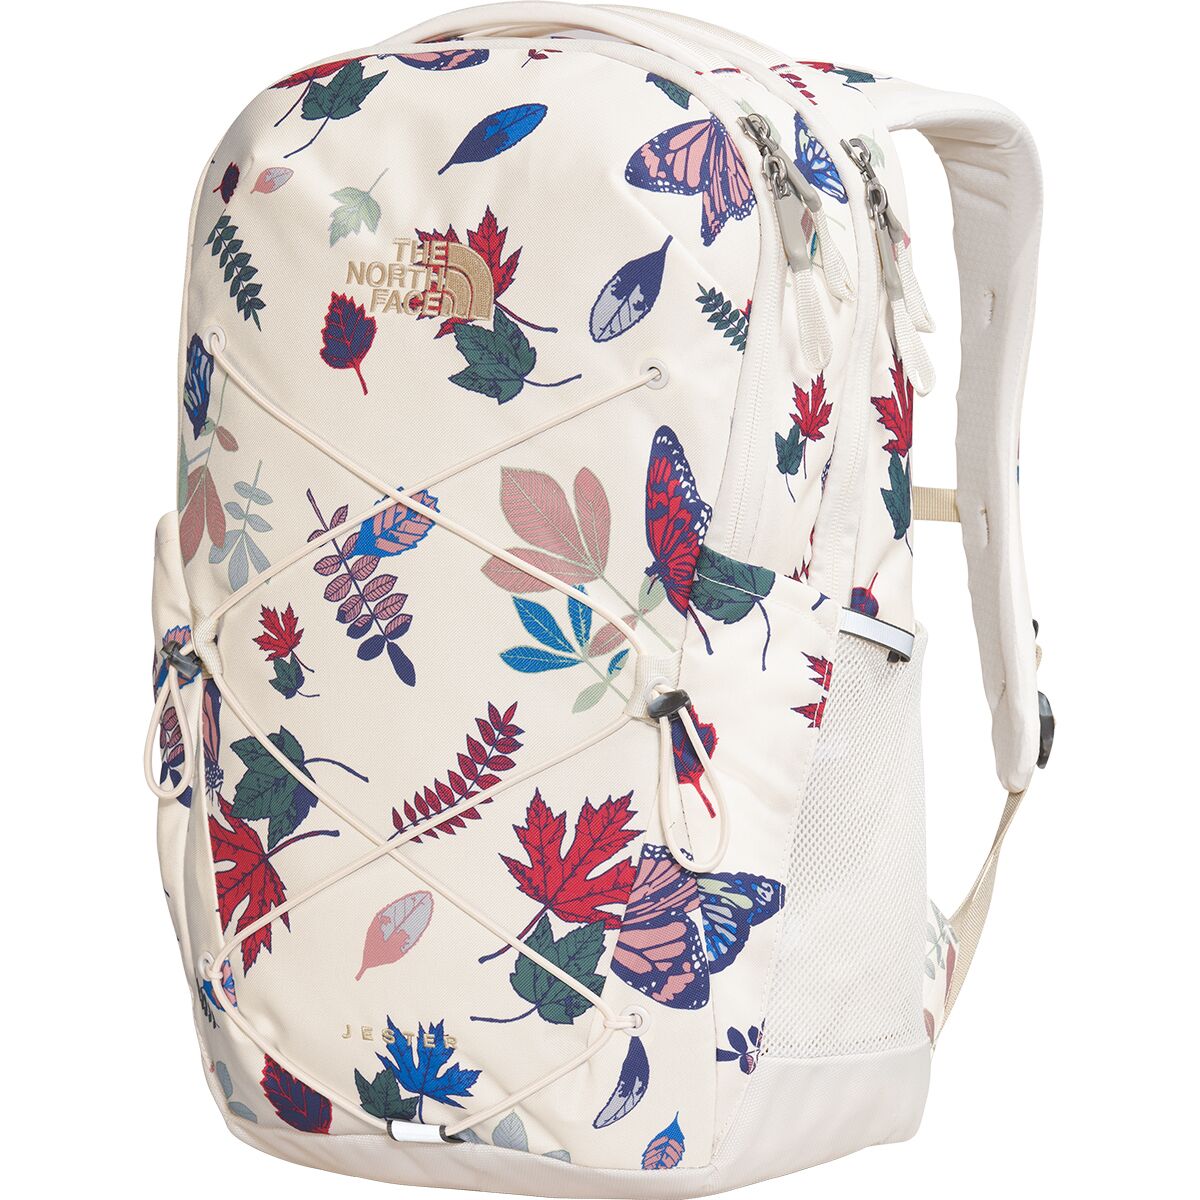 The North Face Jester 27L Backpack - Women's